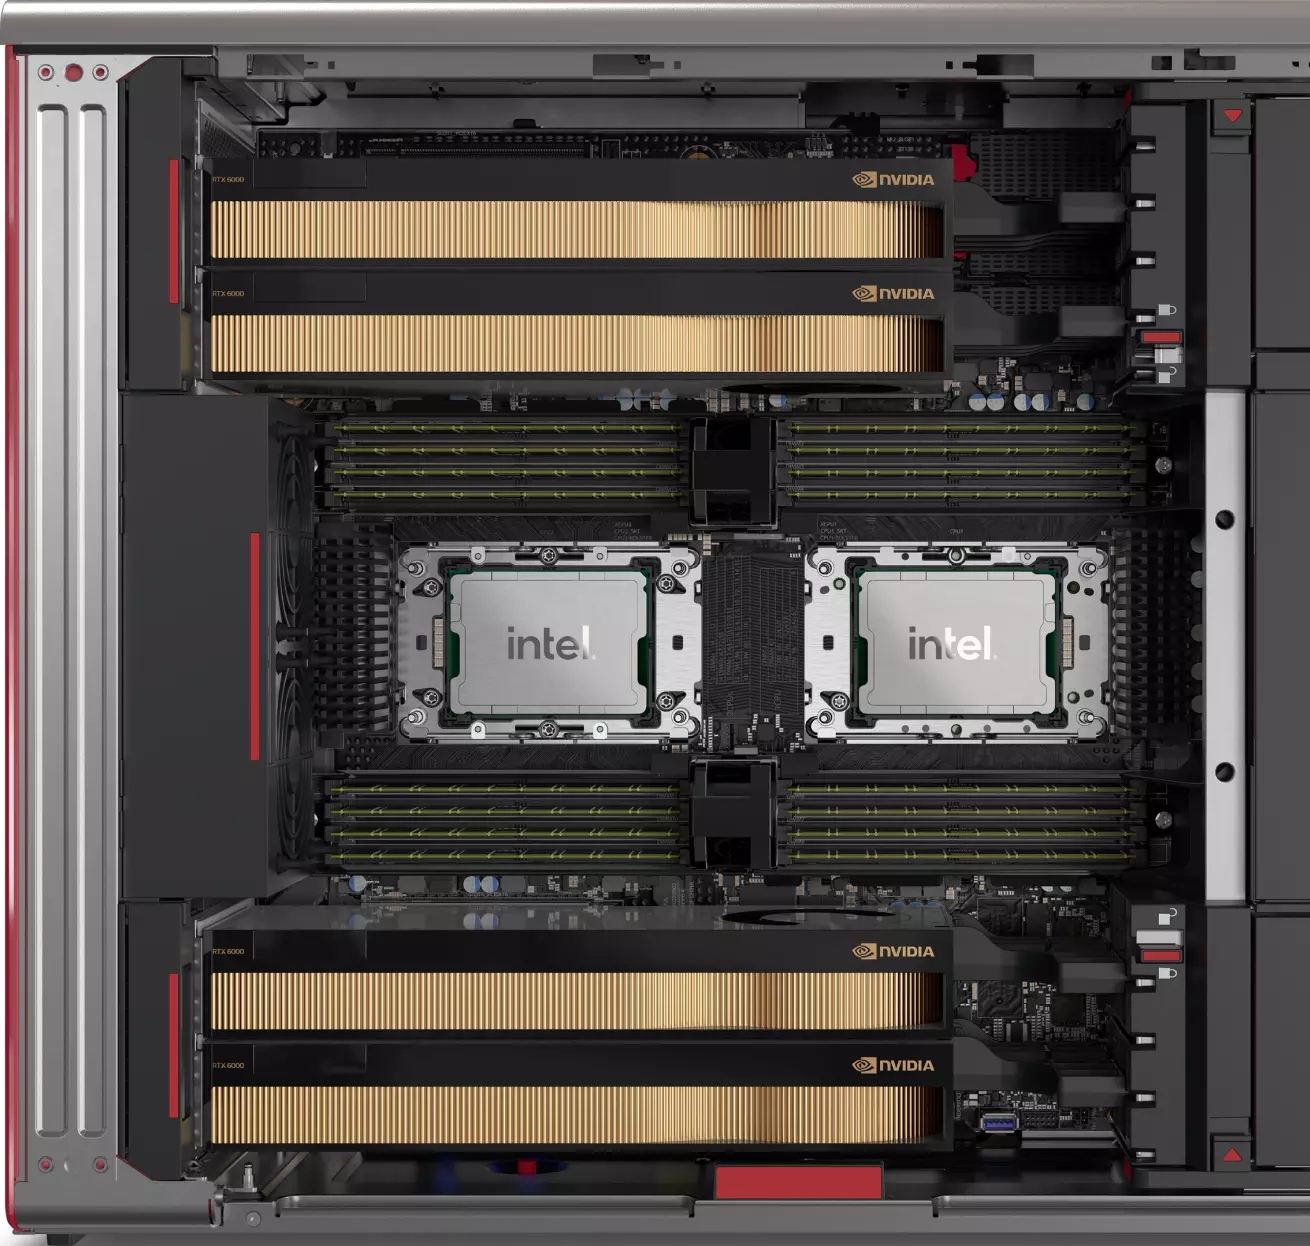 A Lenovo Workstation PX internals detail, showing two CPU's, memory slots and space for four graphic cards